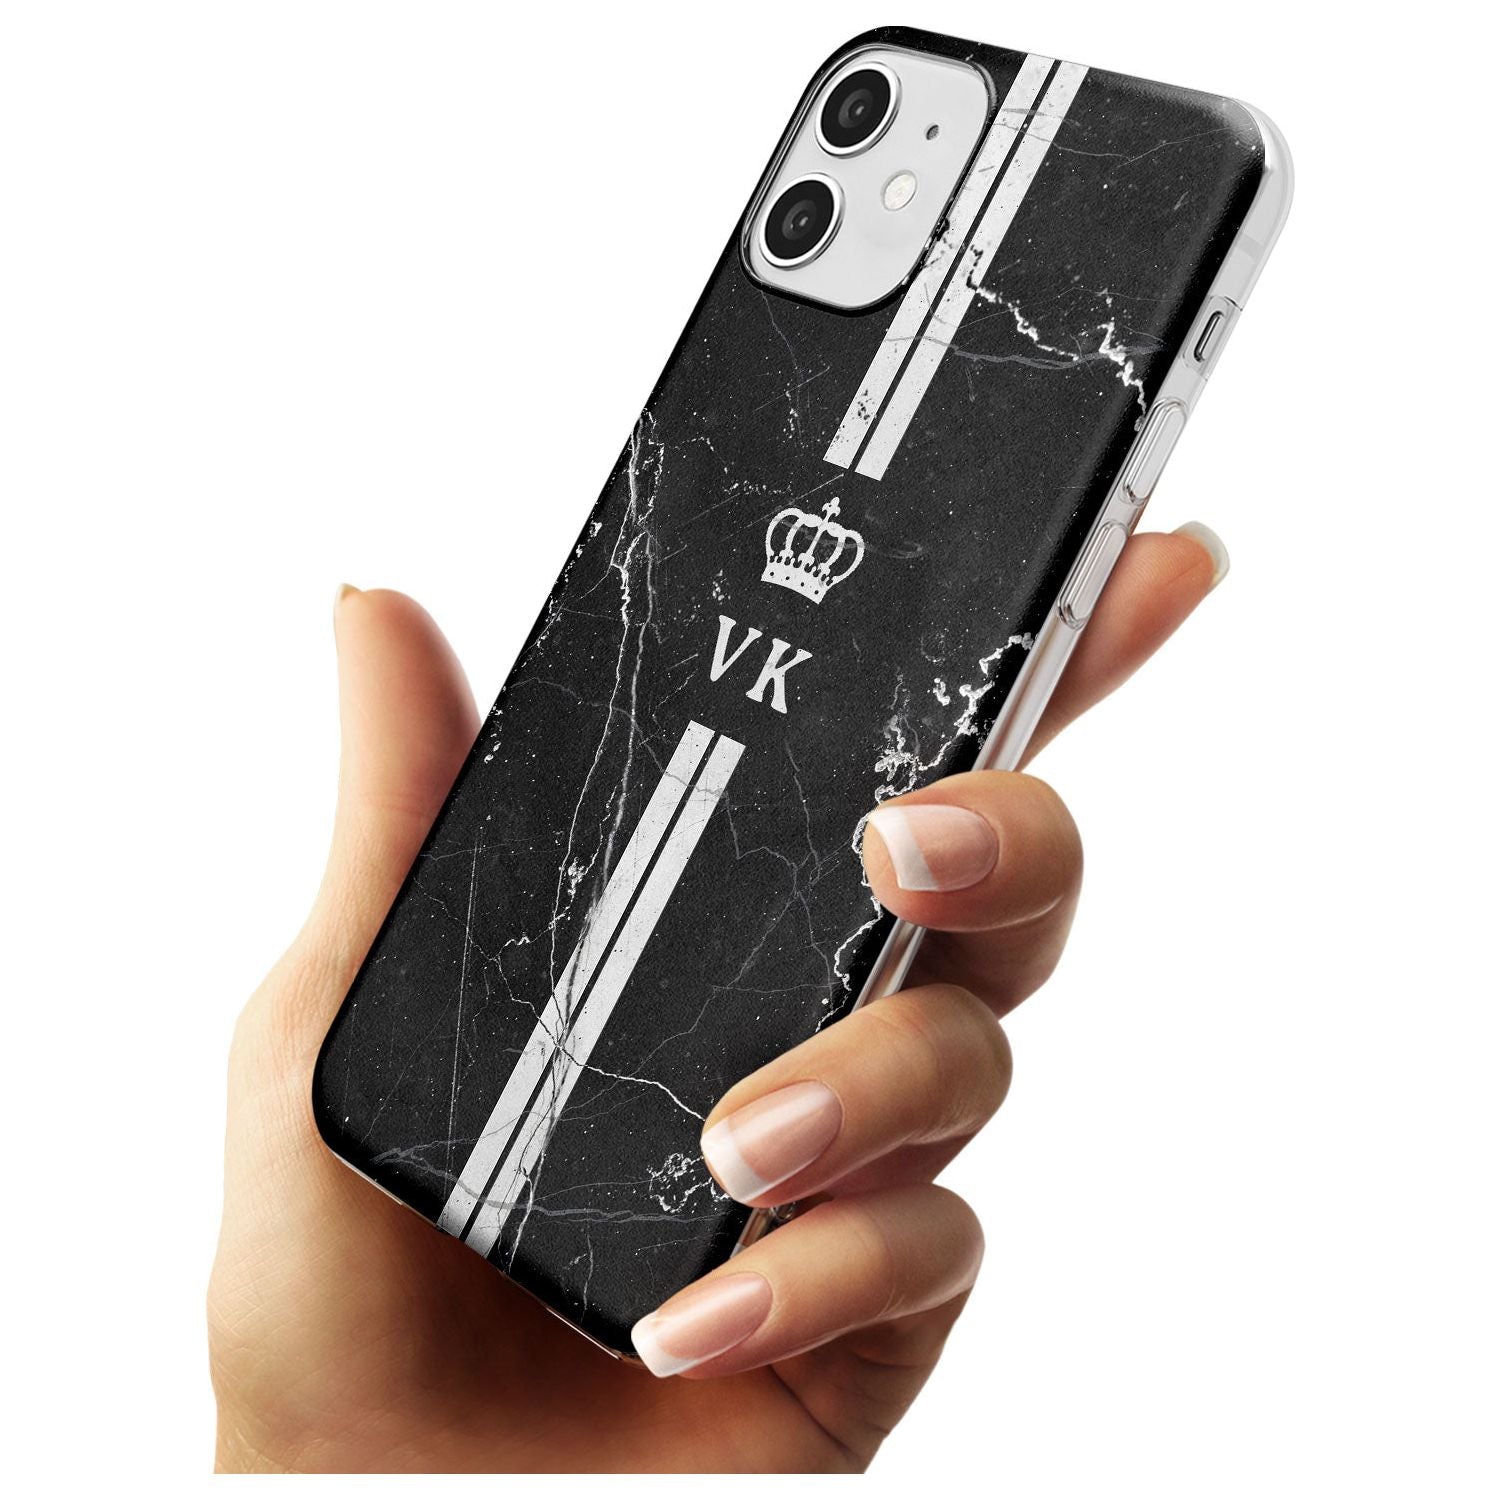 Stripes + Initials with Crown on Black Marble Slim TPU Phone Case for iPhone 11